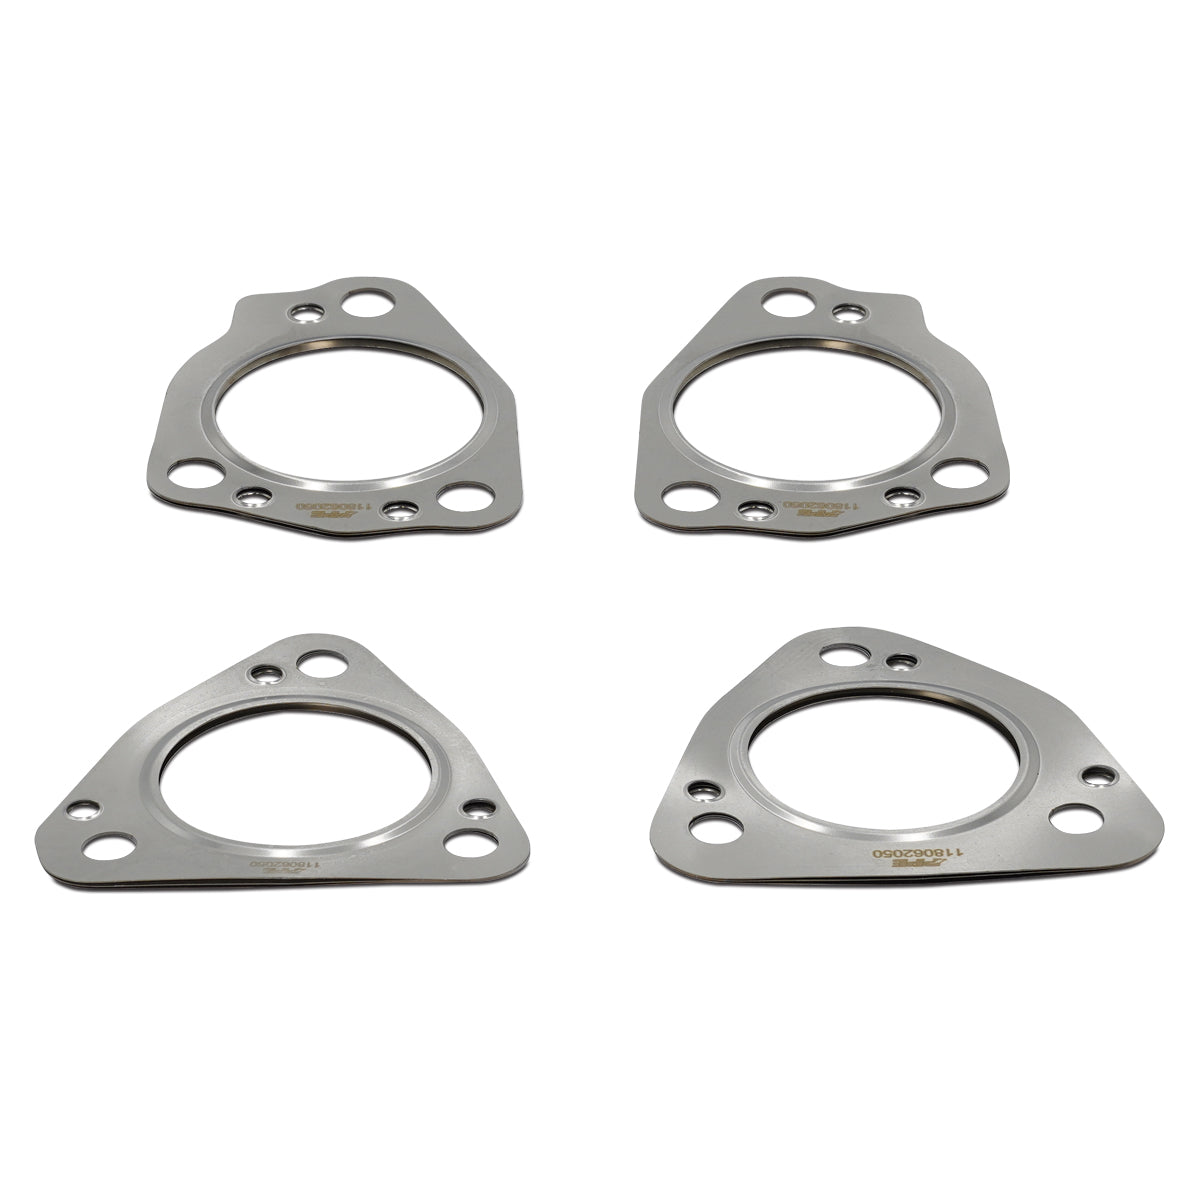 PPE Diesel 2017-2023 GM 6.6L Duramax Stainless-Steel Gasket Set for Duramax L5P Up-Pipes (4 pcs) 118062050